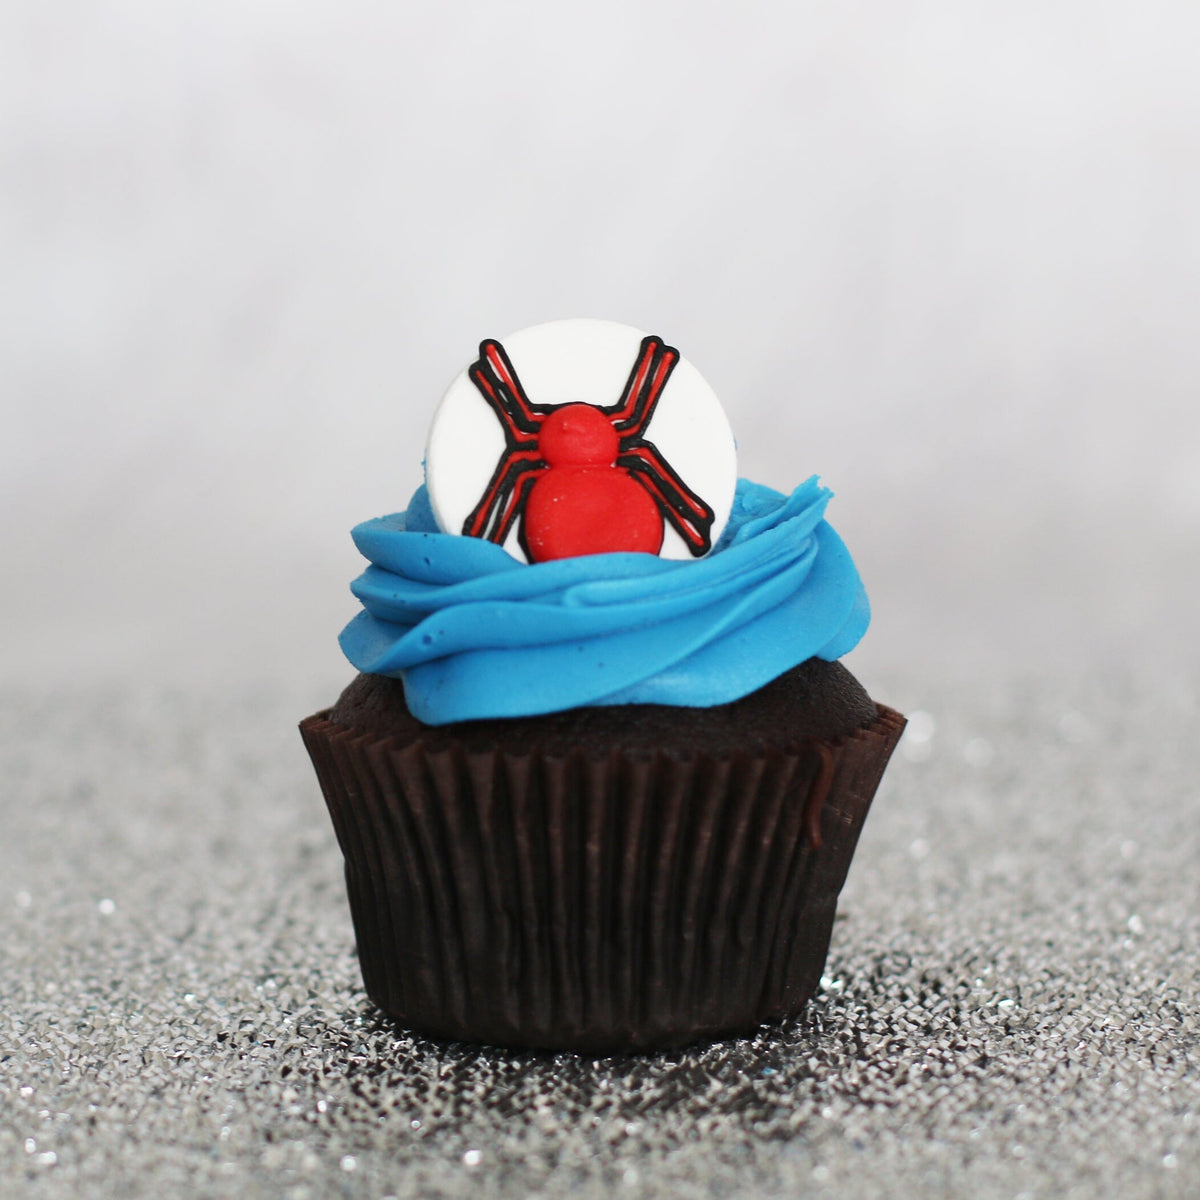 Spider-Man Cupcakes Cupcakes The Cupcake Queens 